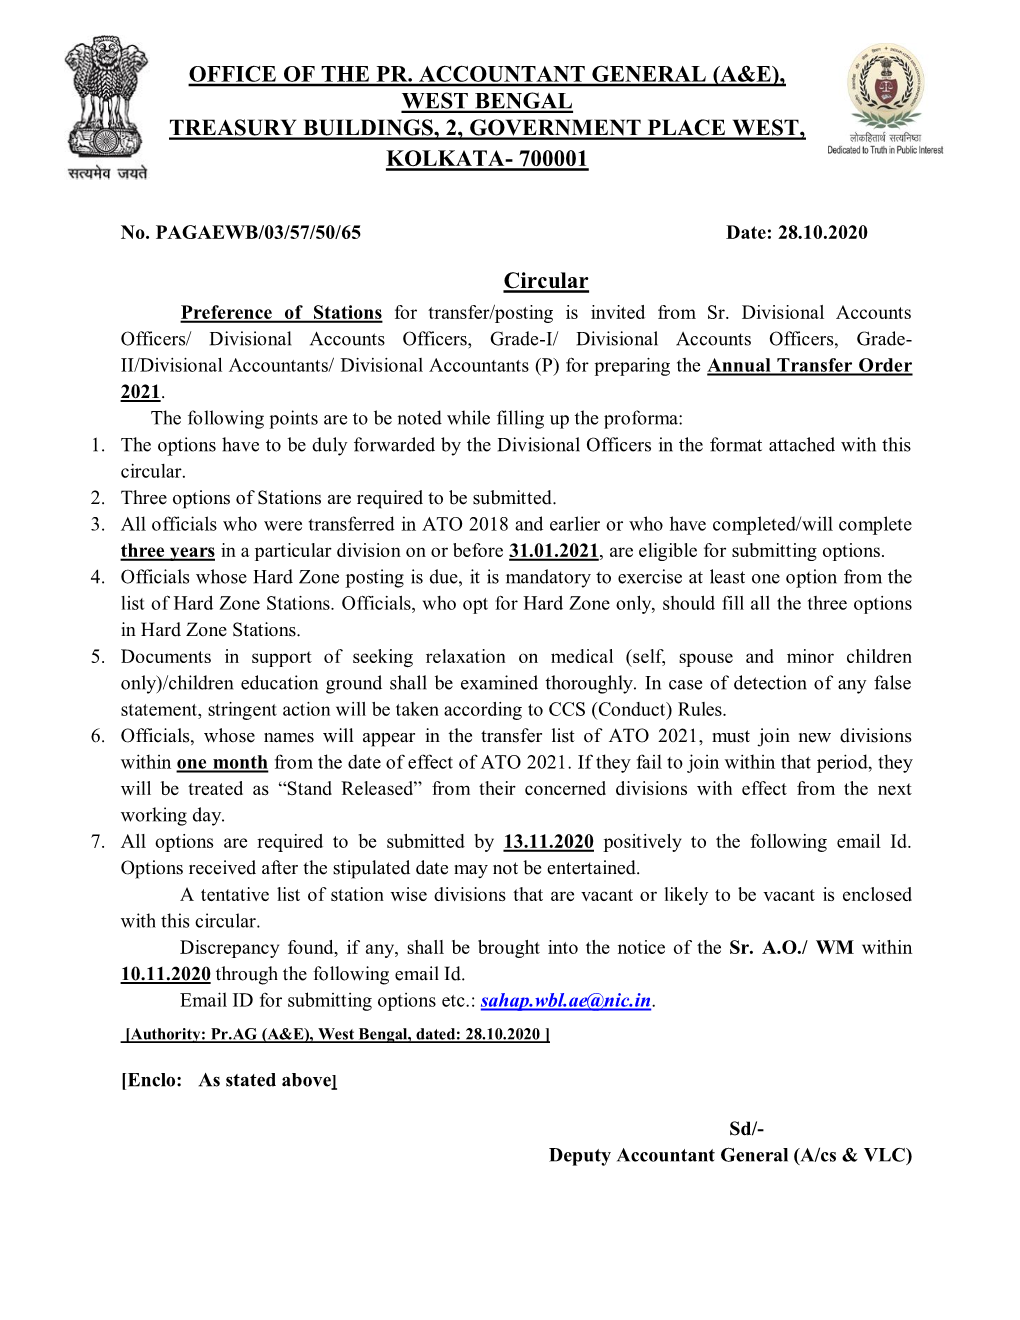 Office of the Pr. Accountant General (A&E), West Bengal